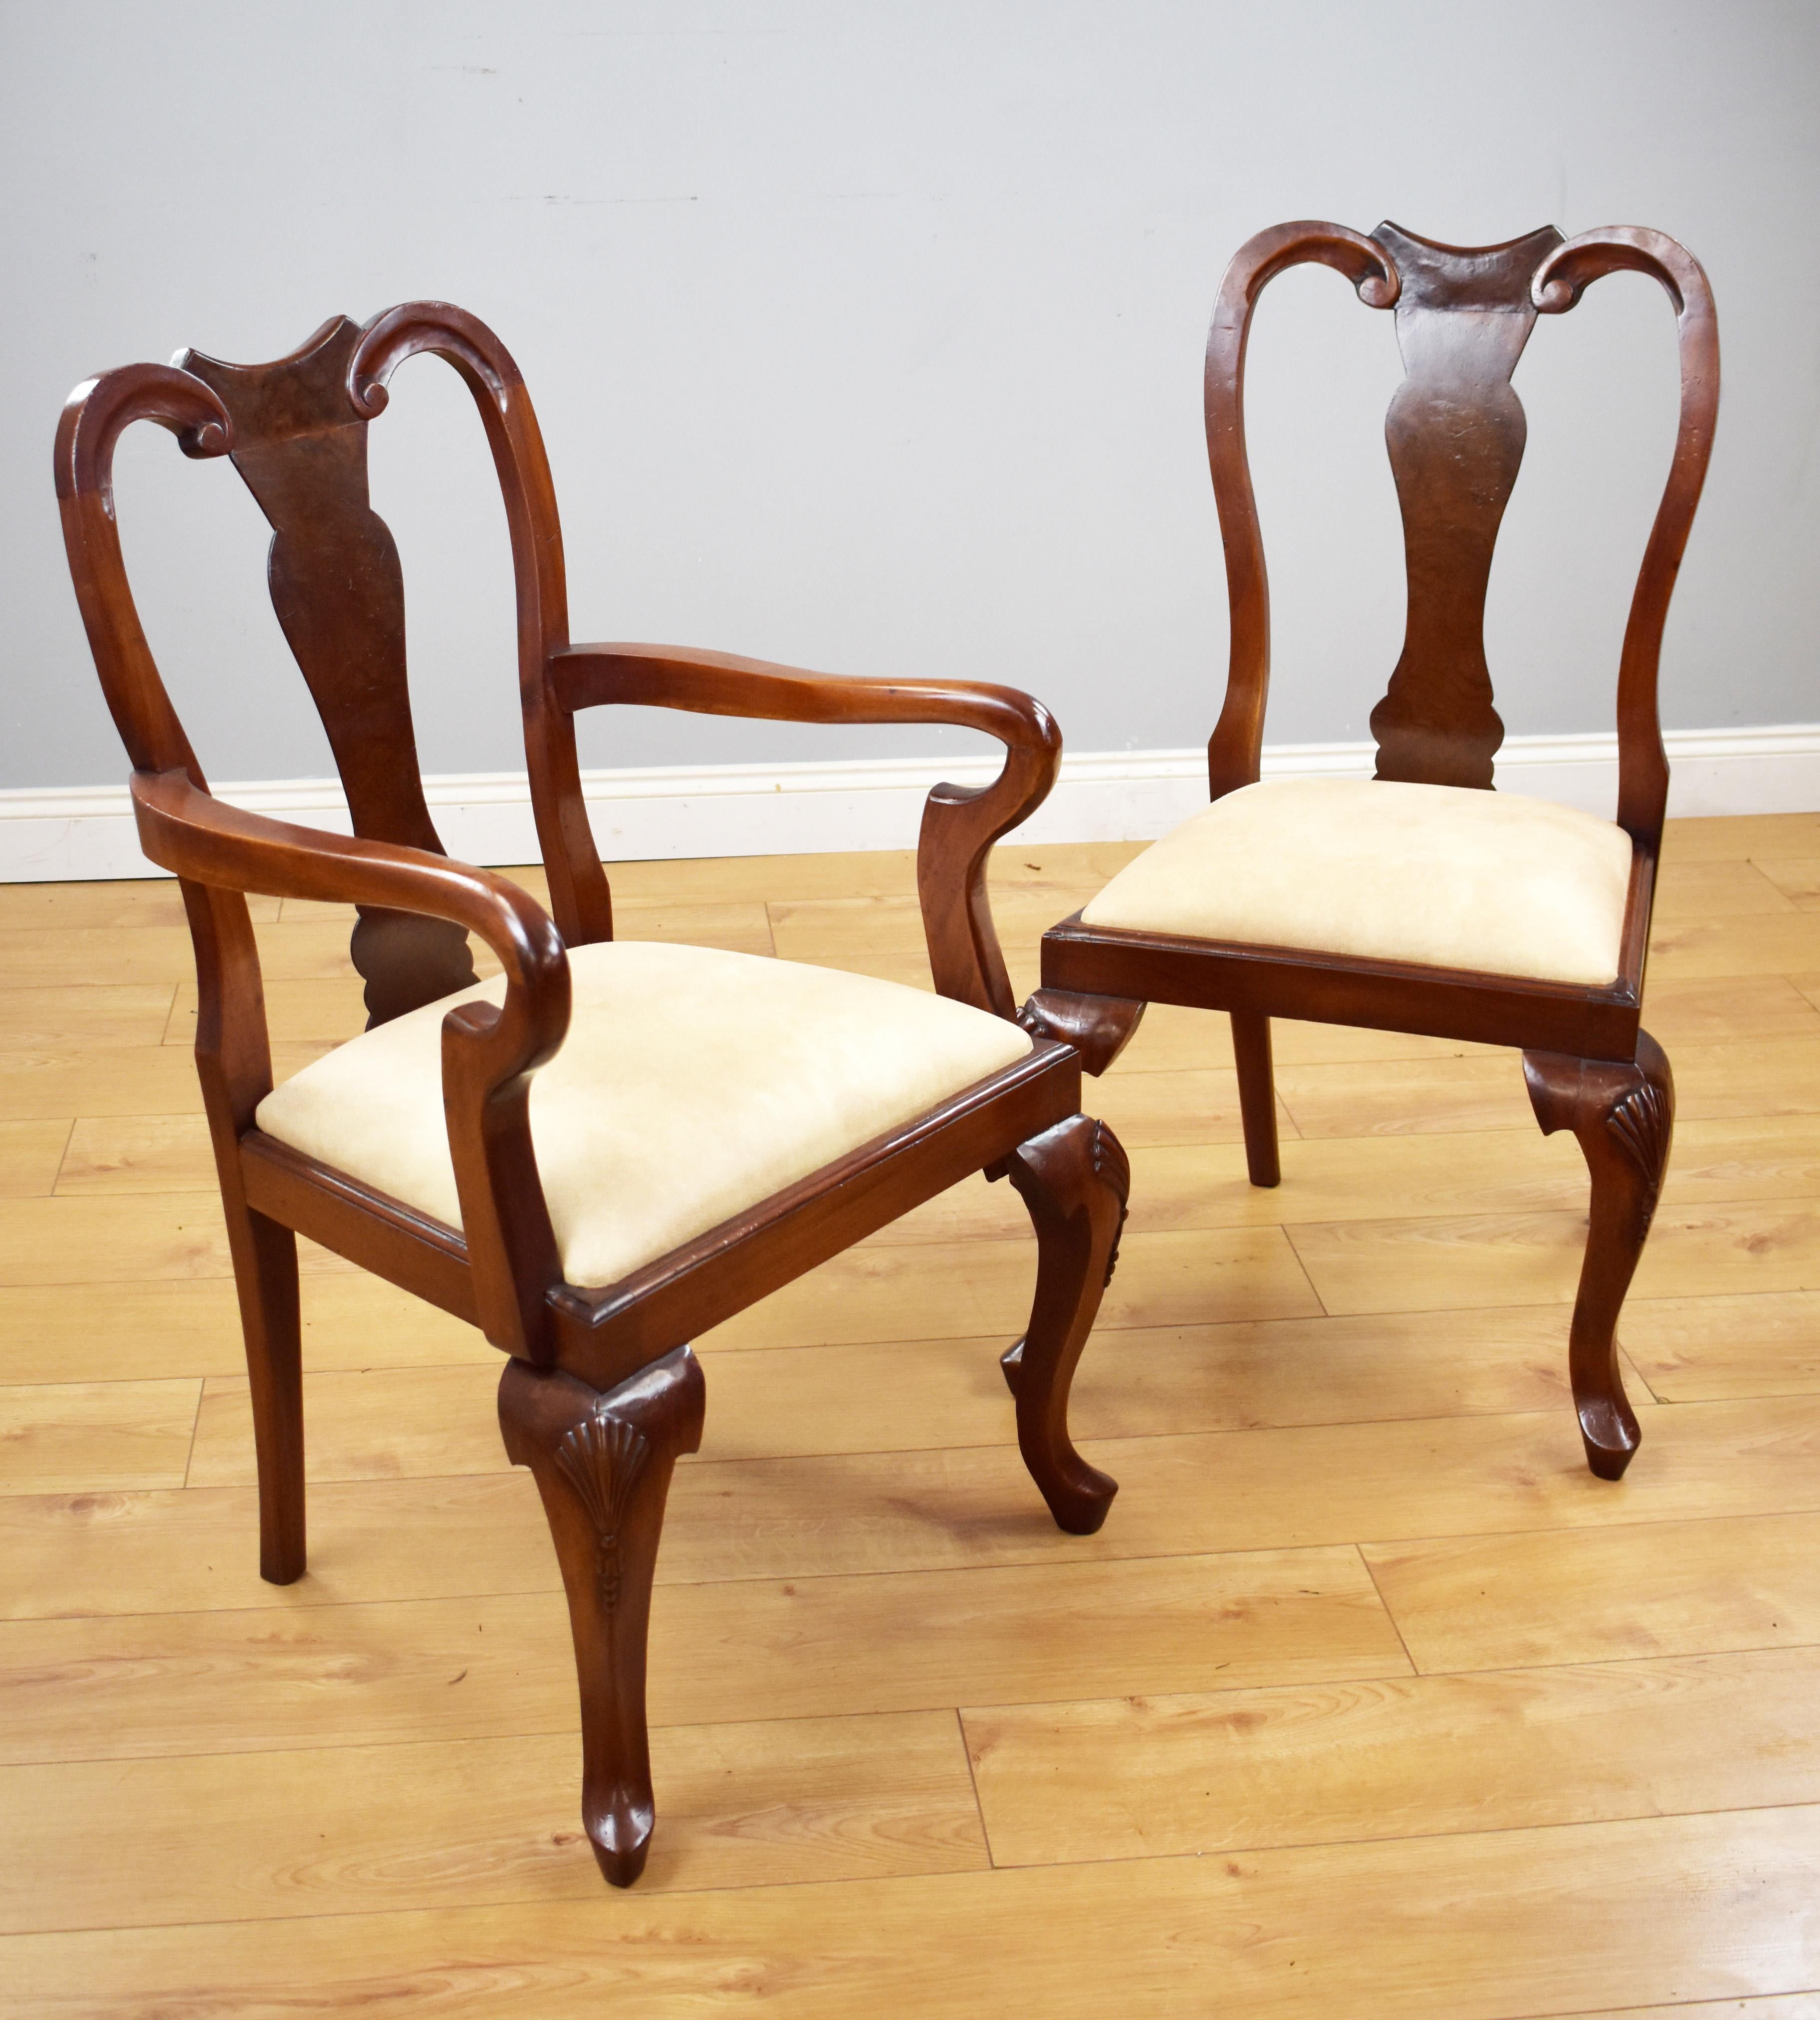 For sale is a good quality set of 12 Queen Anne style burr walnut dining chairs, each with vase shaped backs above drop in seats standing on cabriole legs. Each chair is structurally sound and in good condition having been recently re-upholstered